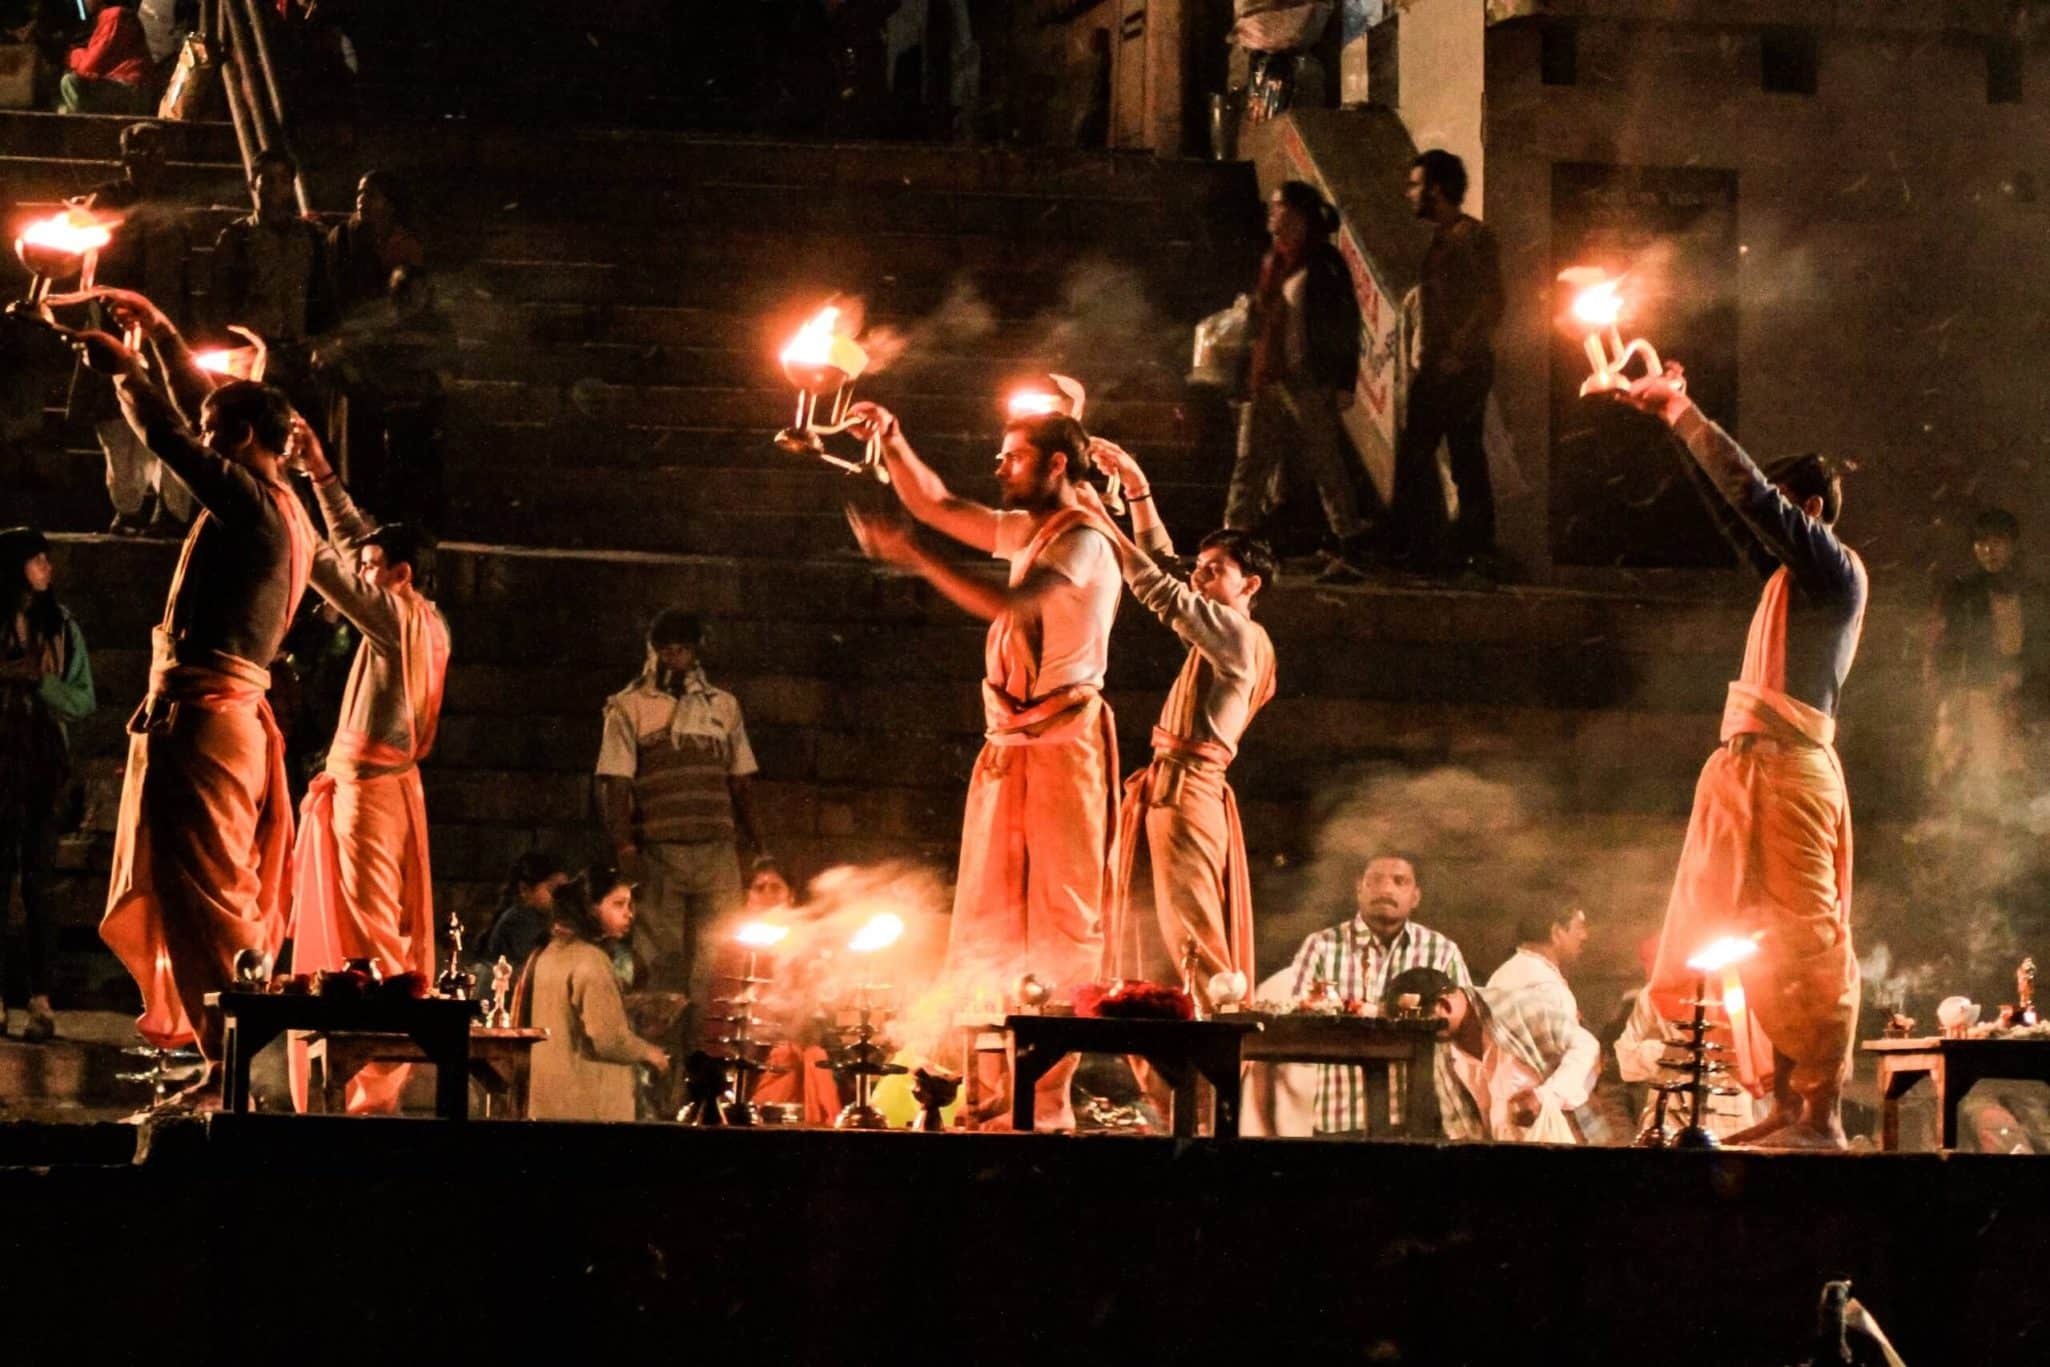 How to attend the spectacular Ganga Aarti of Varanasi